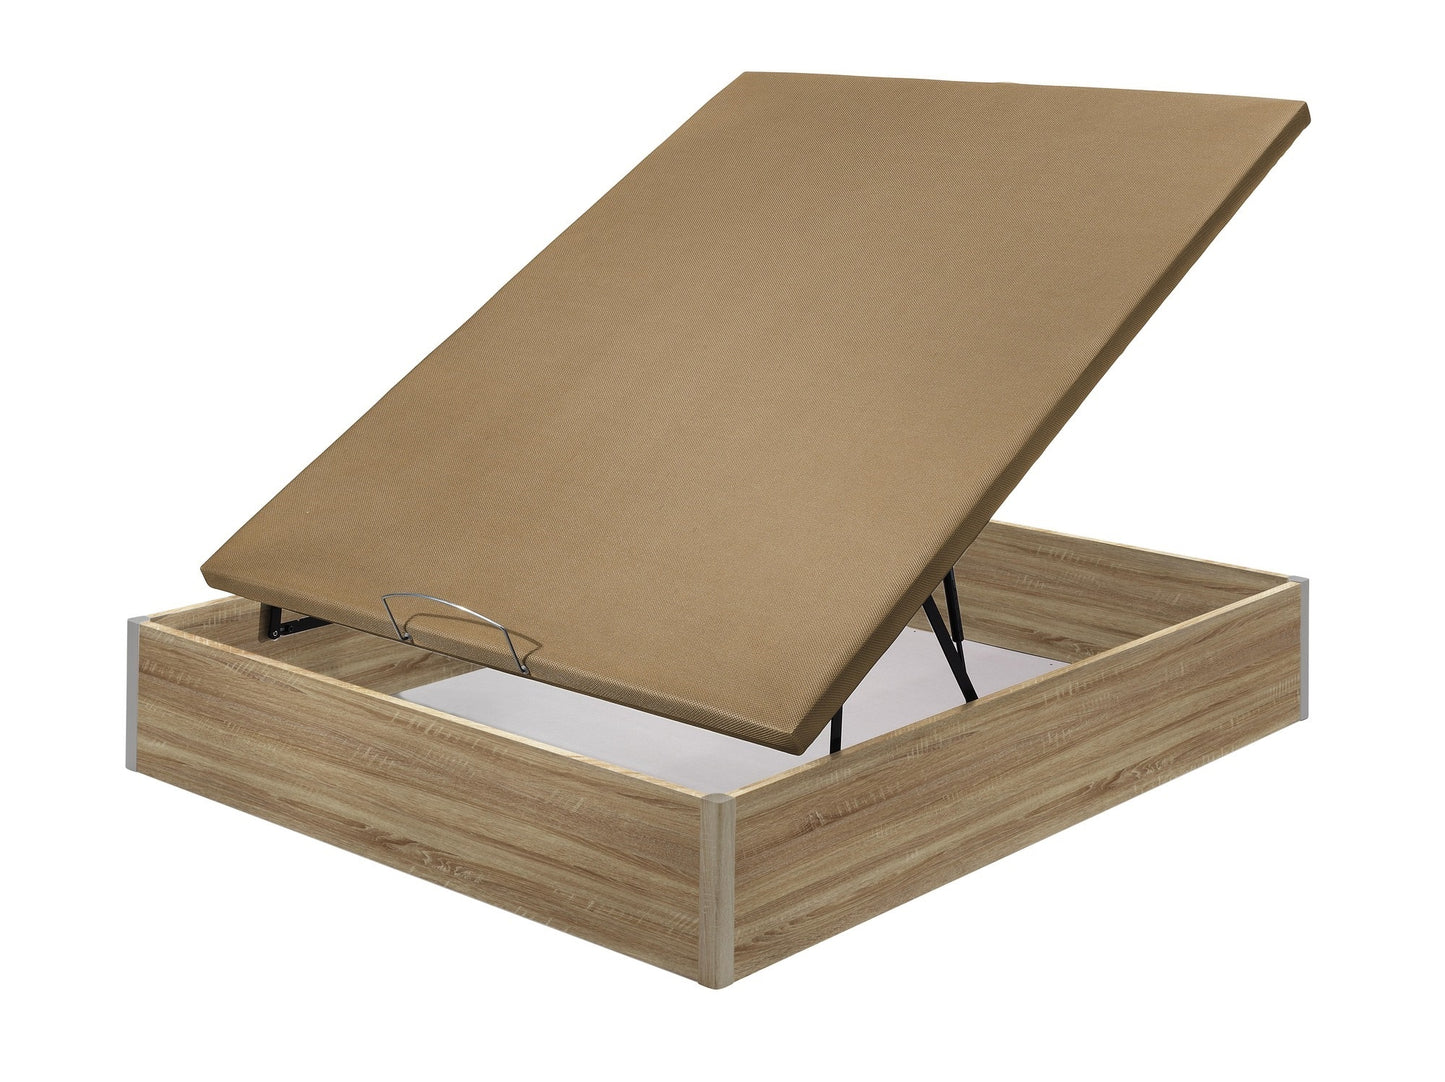 Pack Canapé Madera Basic Roble y Colchón Toscana deluxe  | 21 cm